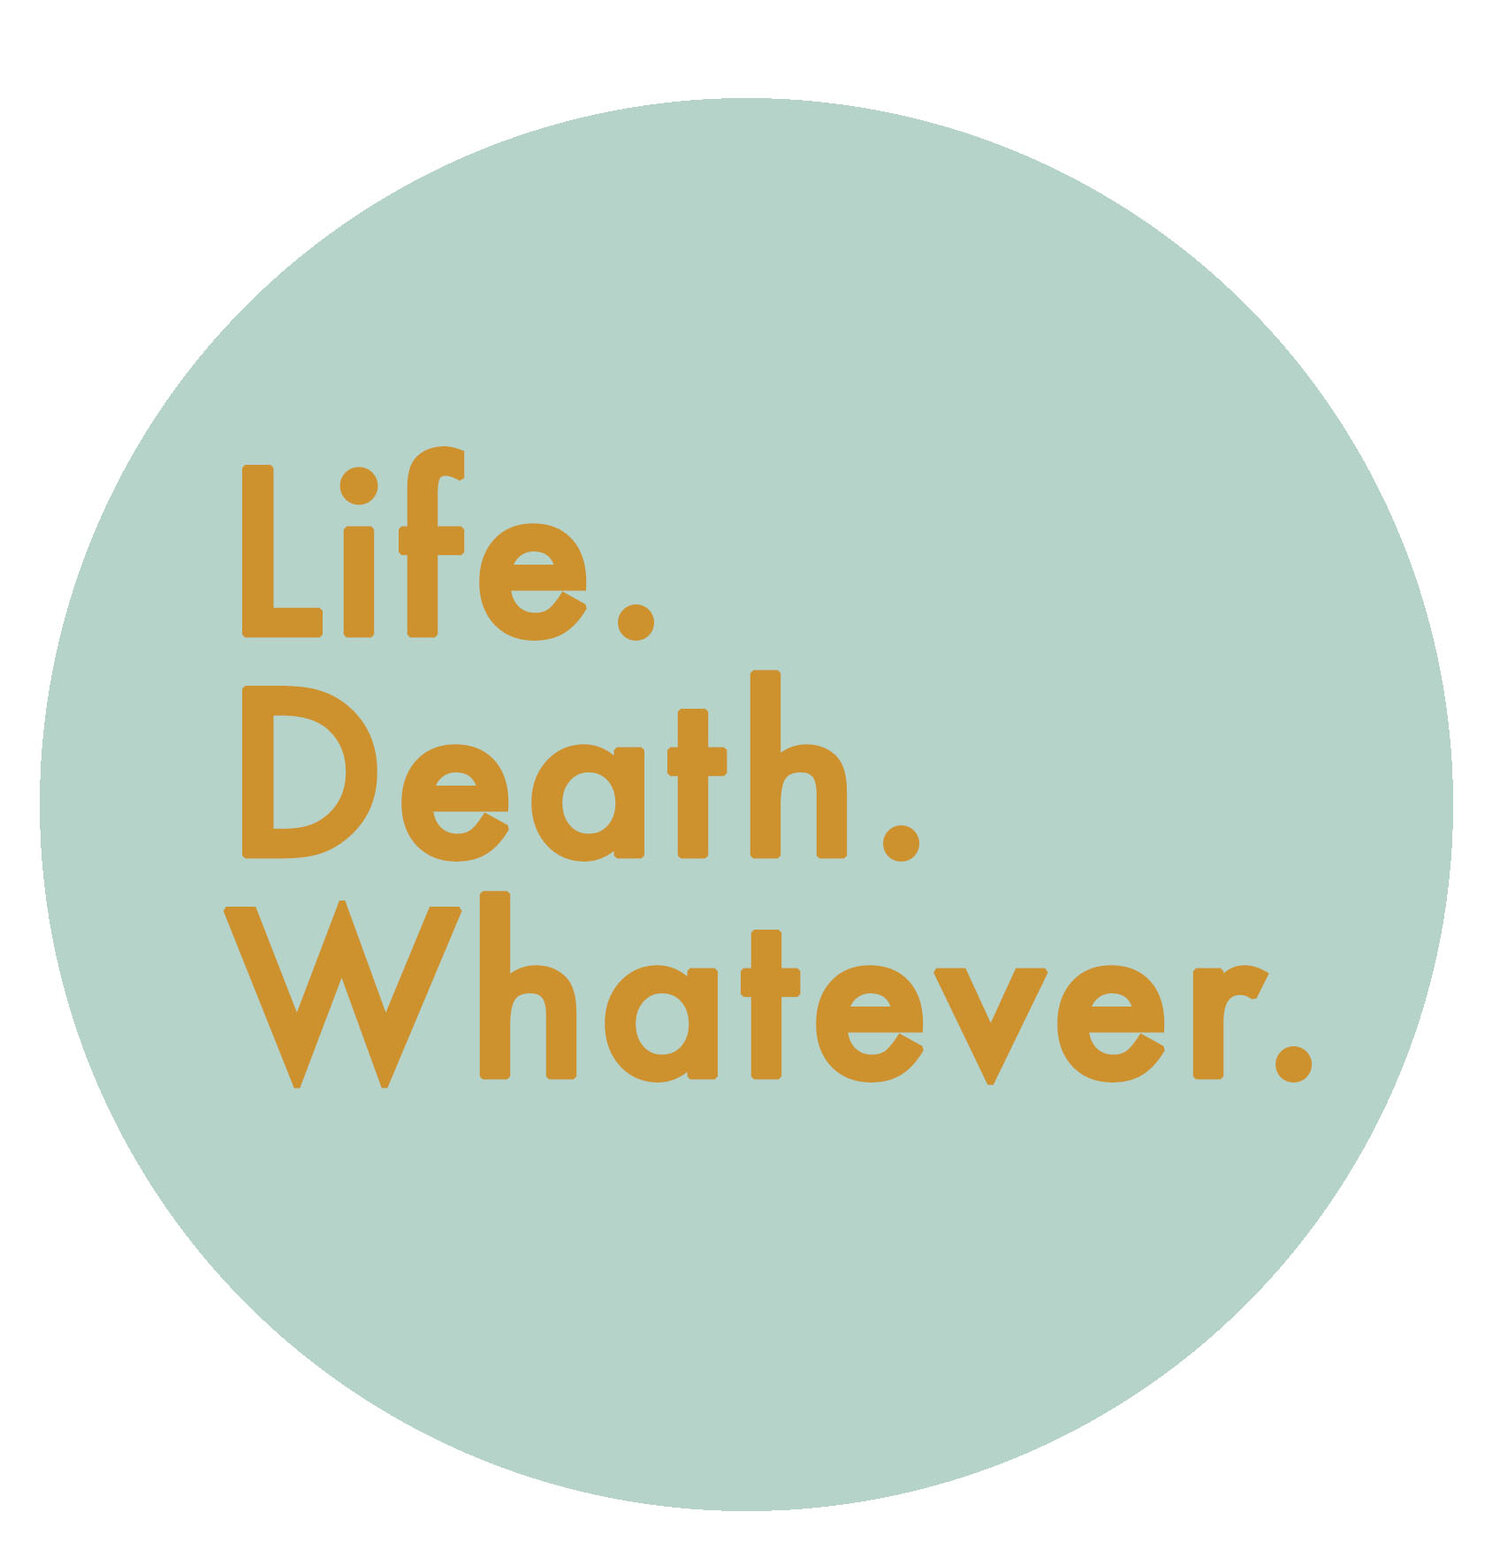 Life. Death. Whatever.